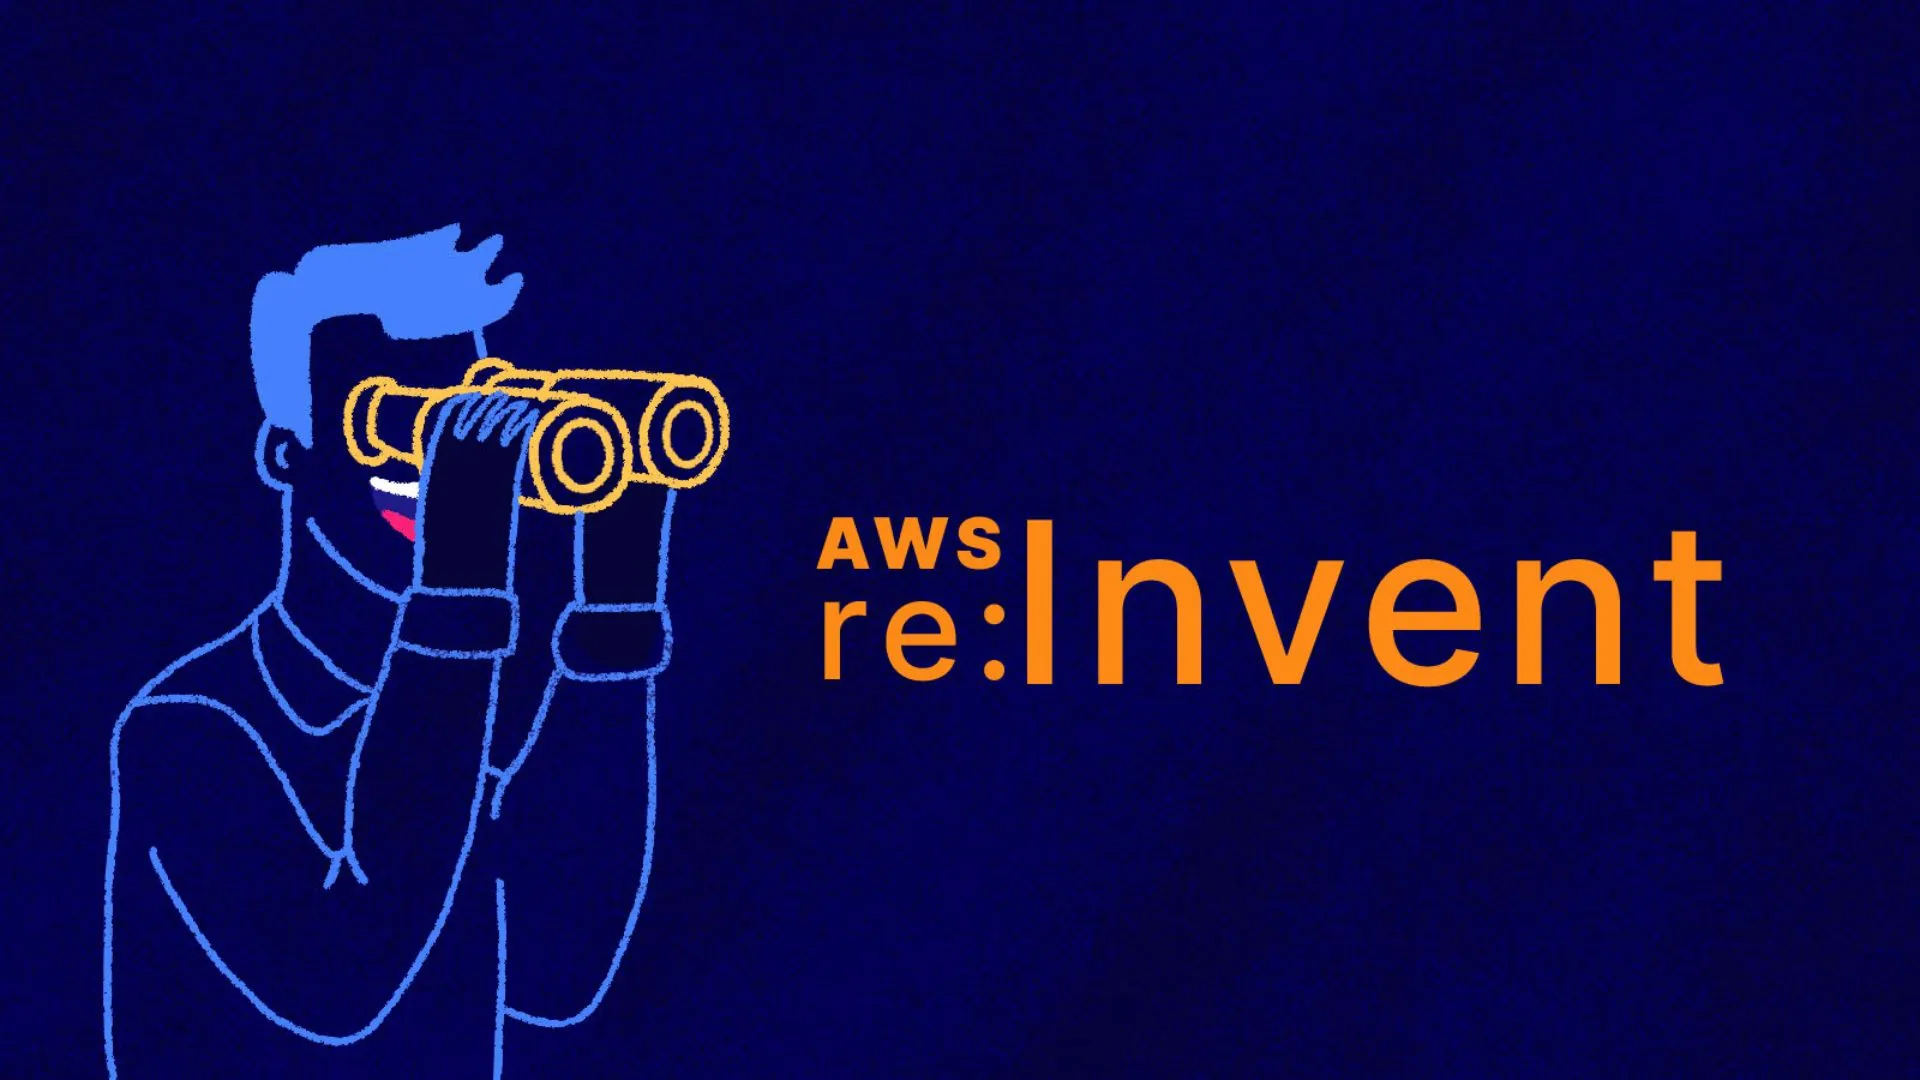 The Ultimate Guide to AWS re:Invent 2020